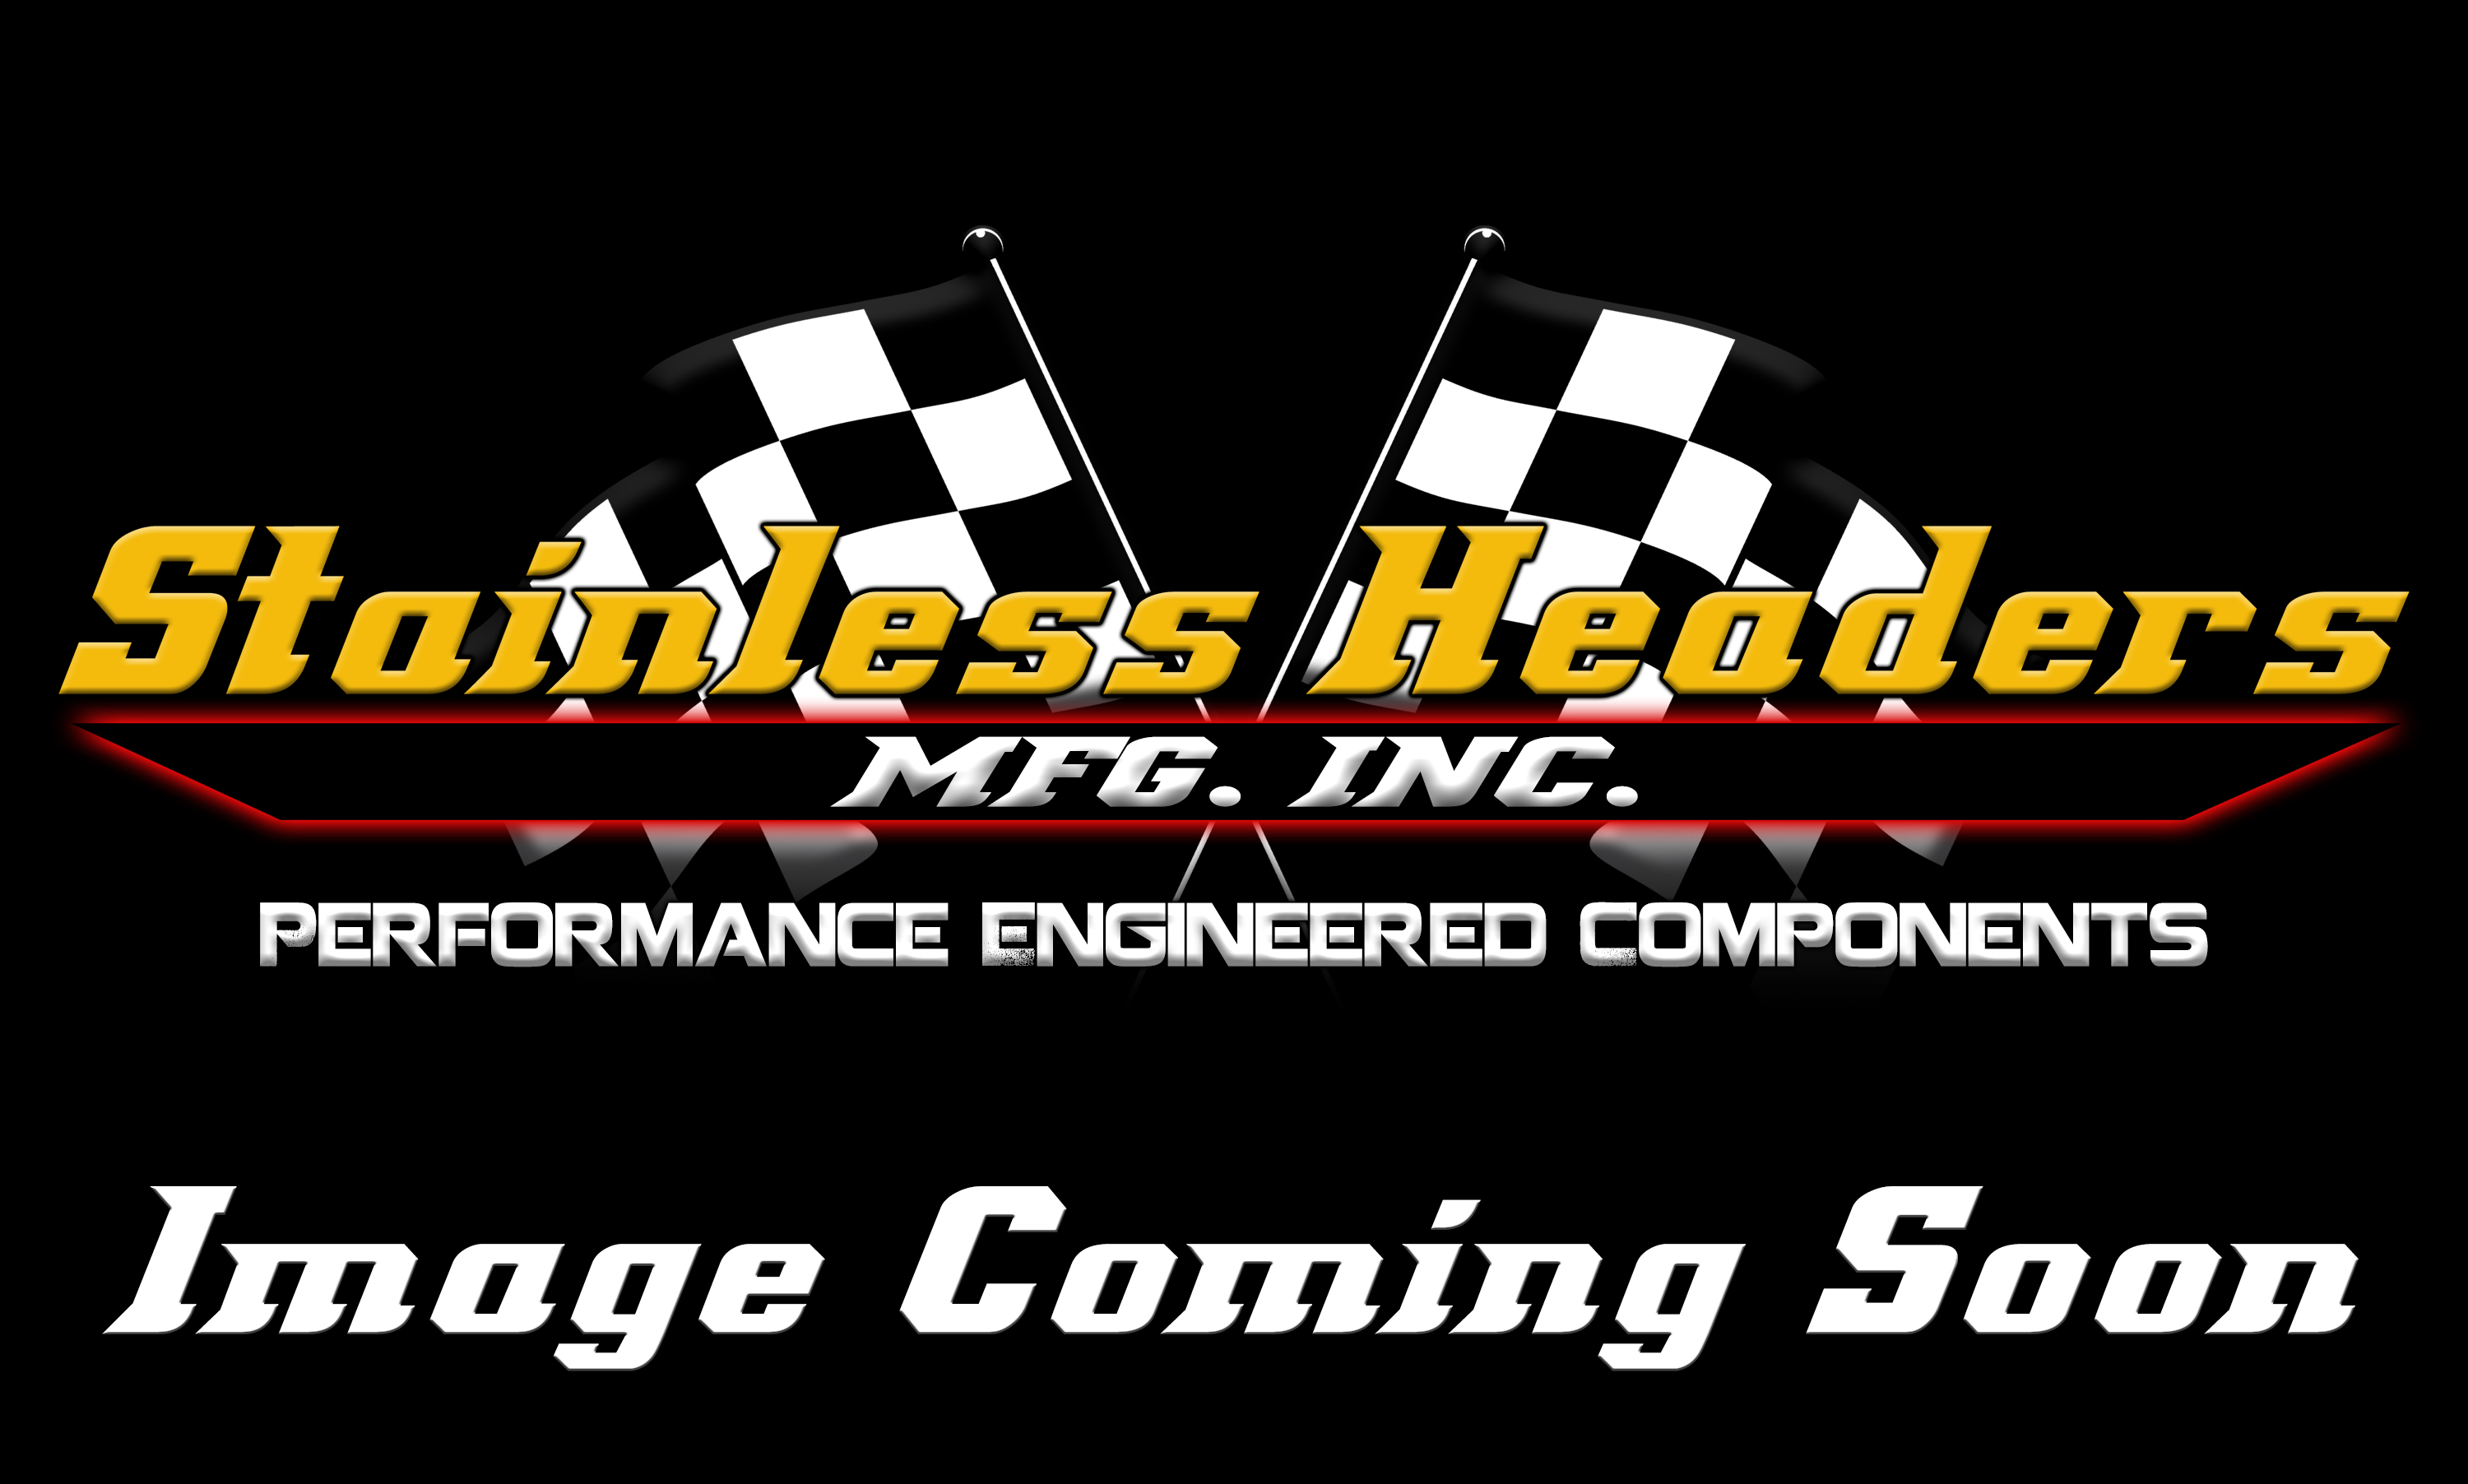 Stainless Headers - 2 3/8" Primary 5 into 1 Performance Merge Collector-18ga 304ss